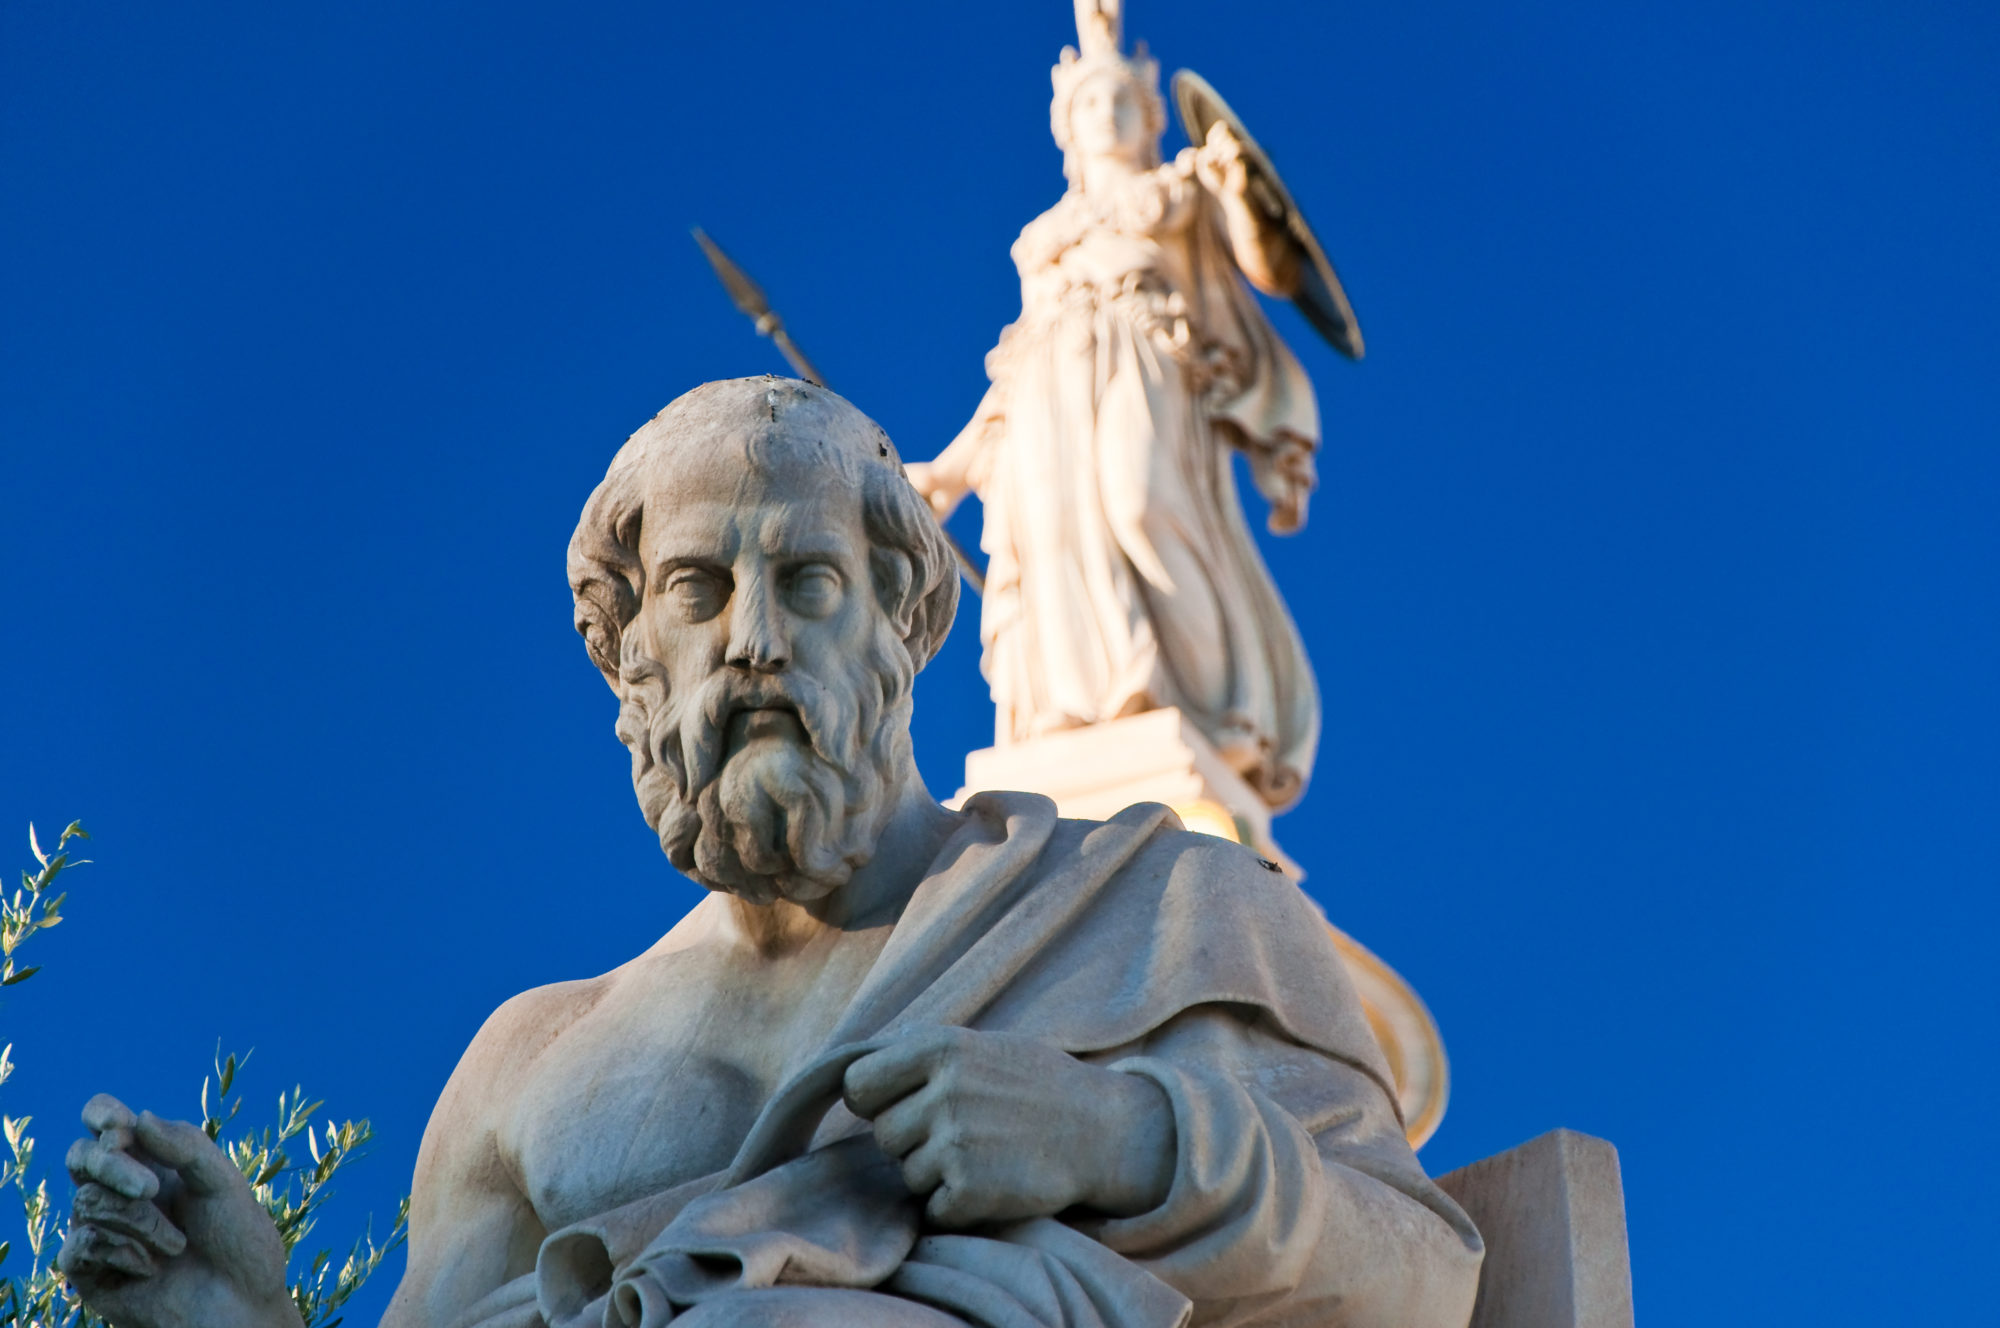 The statue of Plato. Athens, Greece.